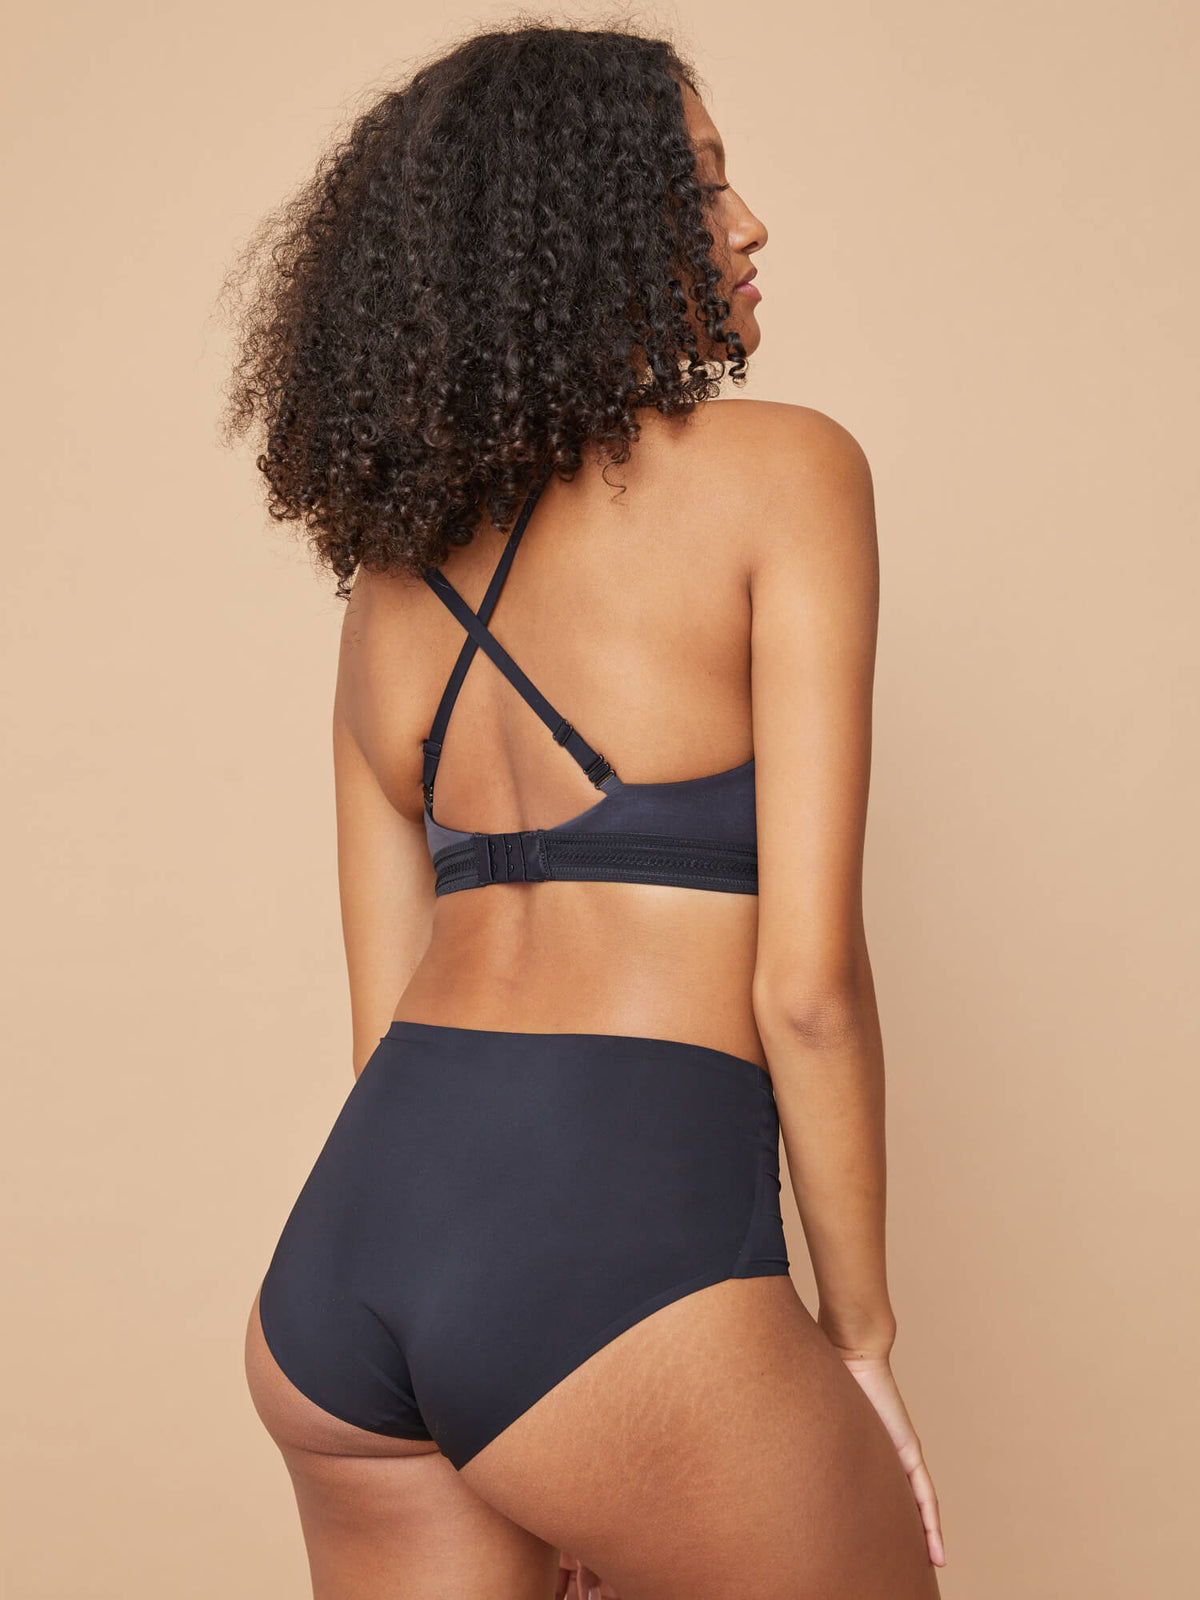 Cross back of Fine Lines Supersoft Convertible T Shirt Bra in Black